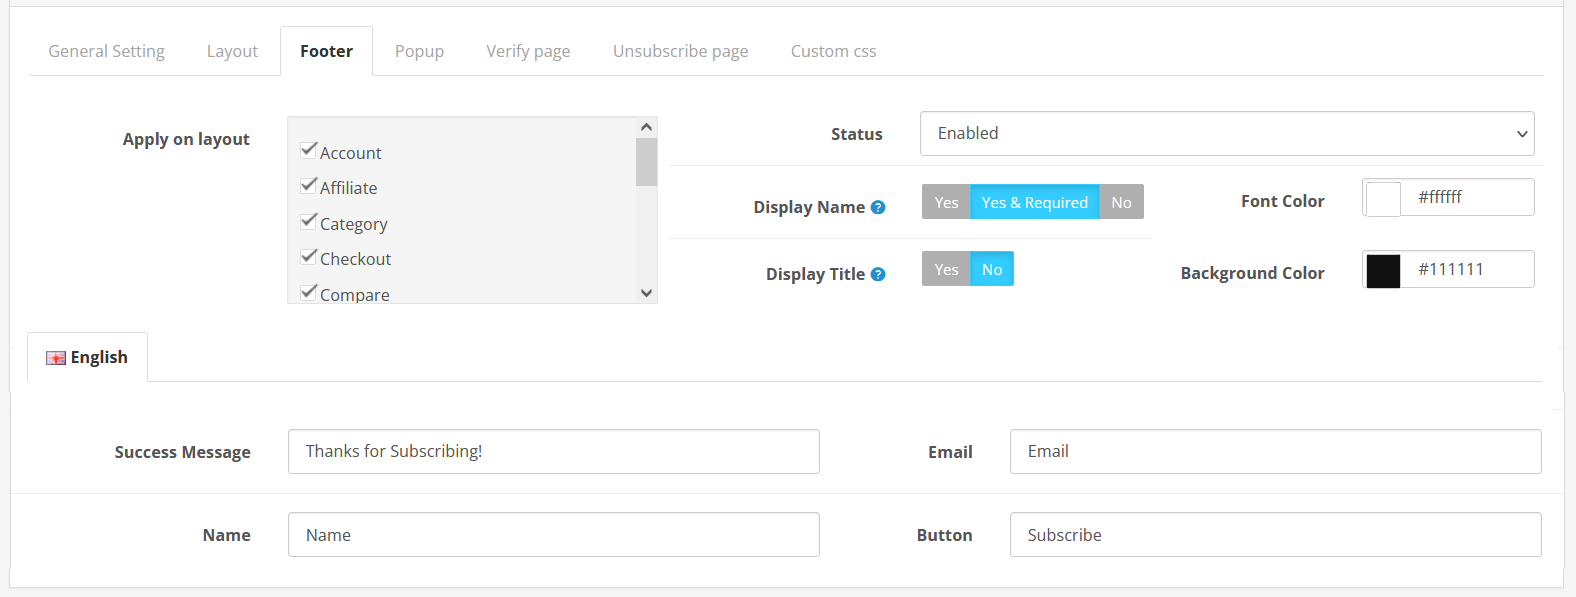 designing the-newsletter email form in popup using newsletter module in opencart1